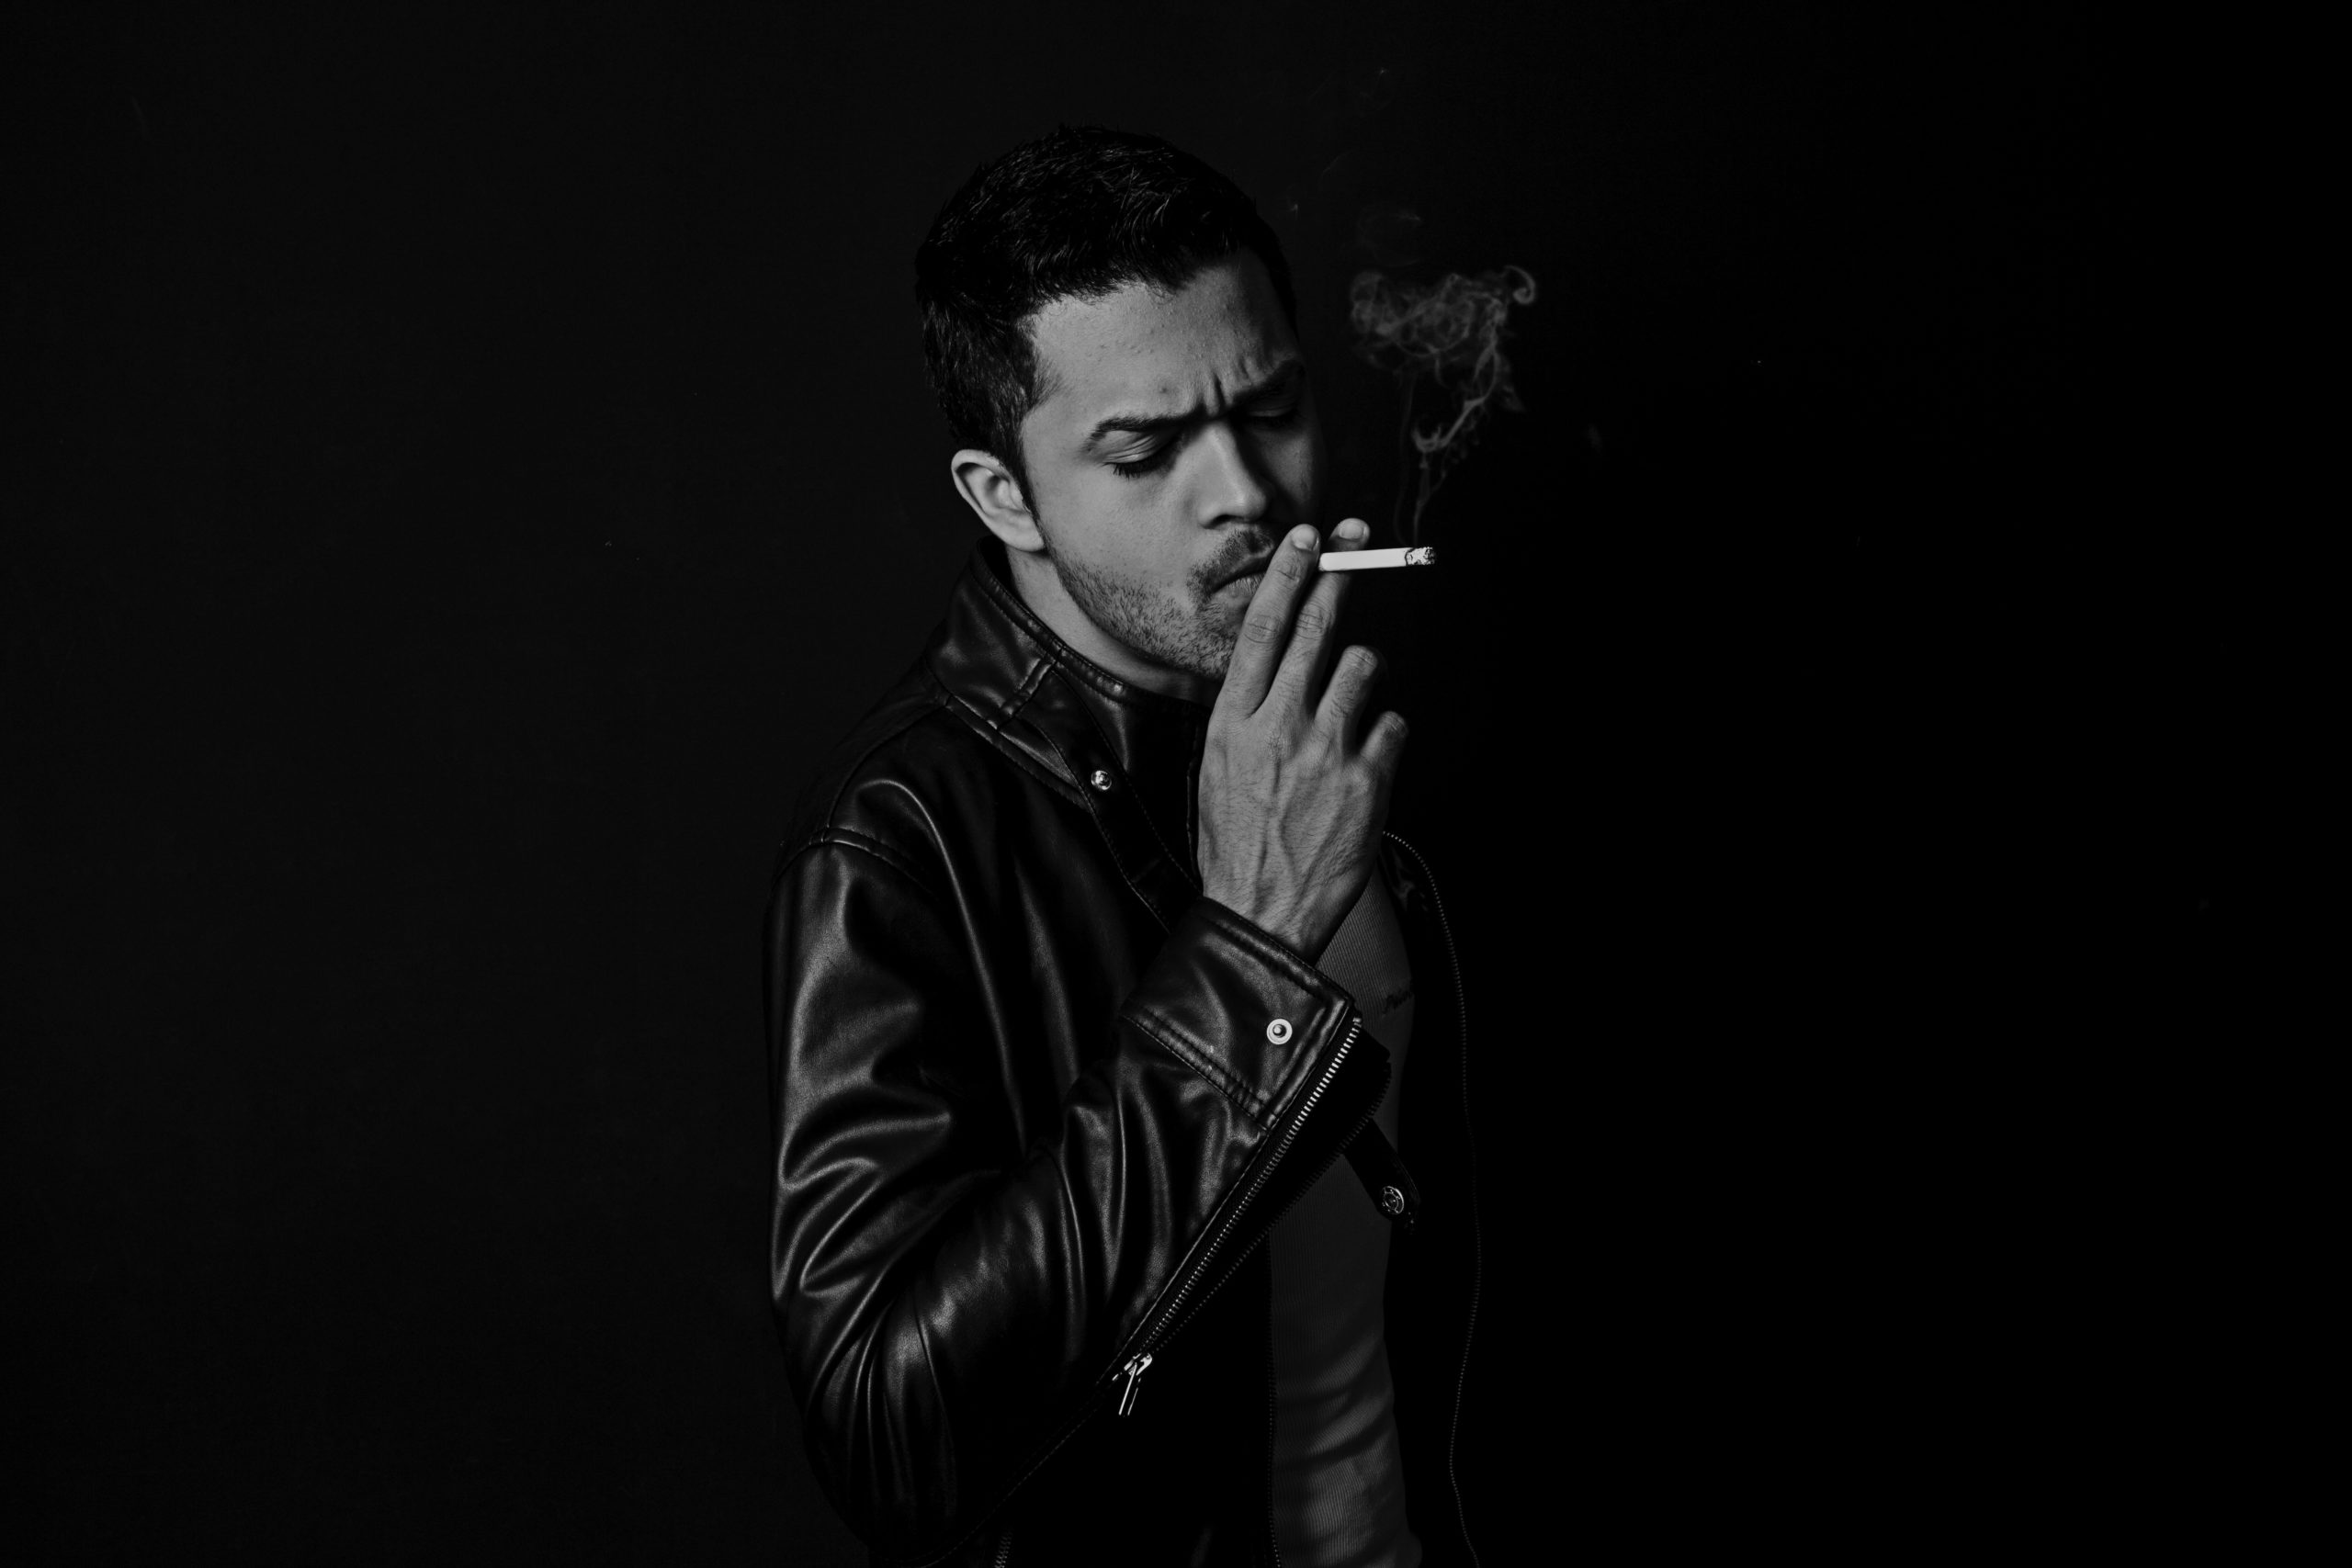 Man holding a cigarette against their mouth.